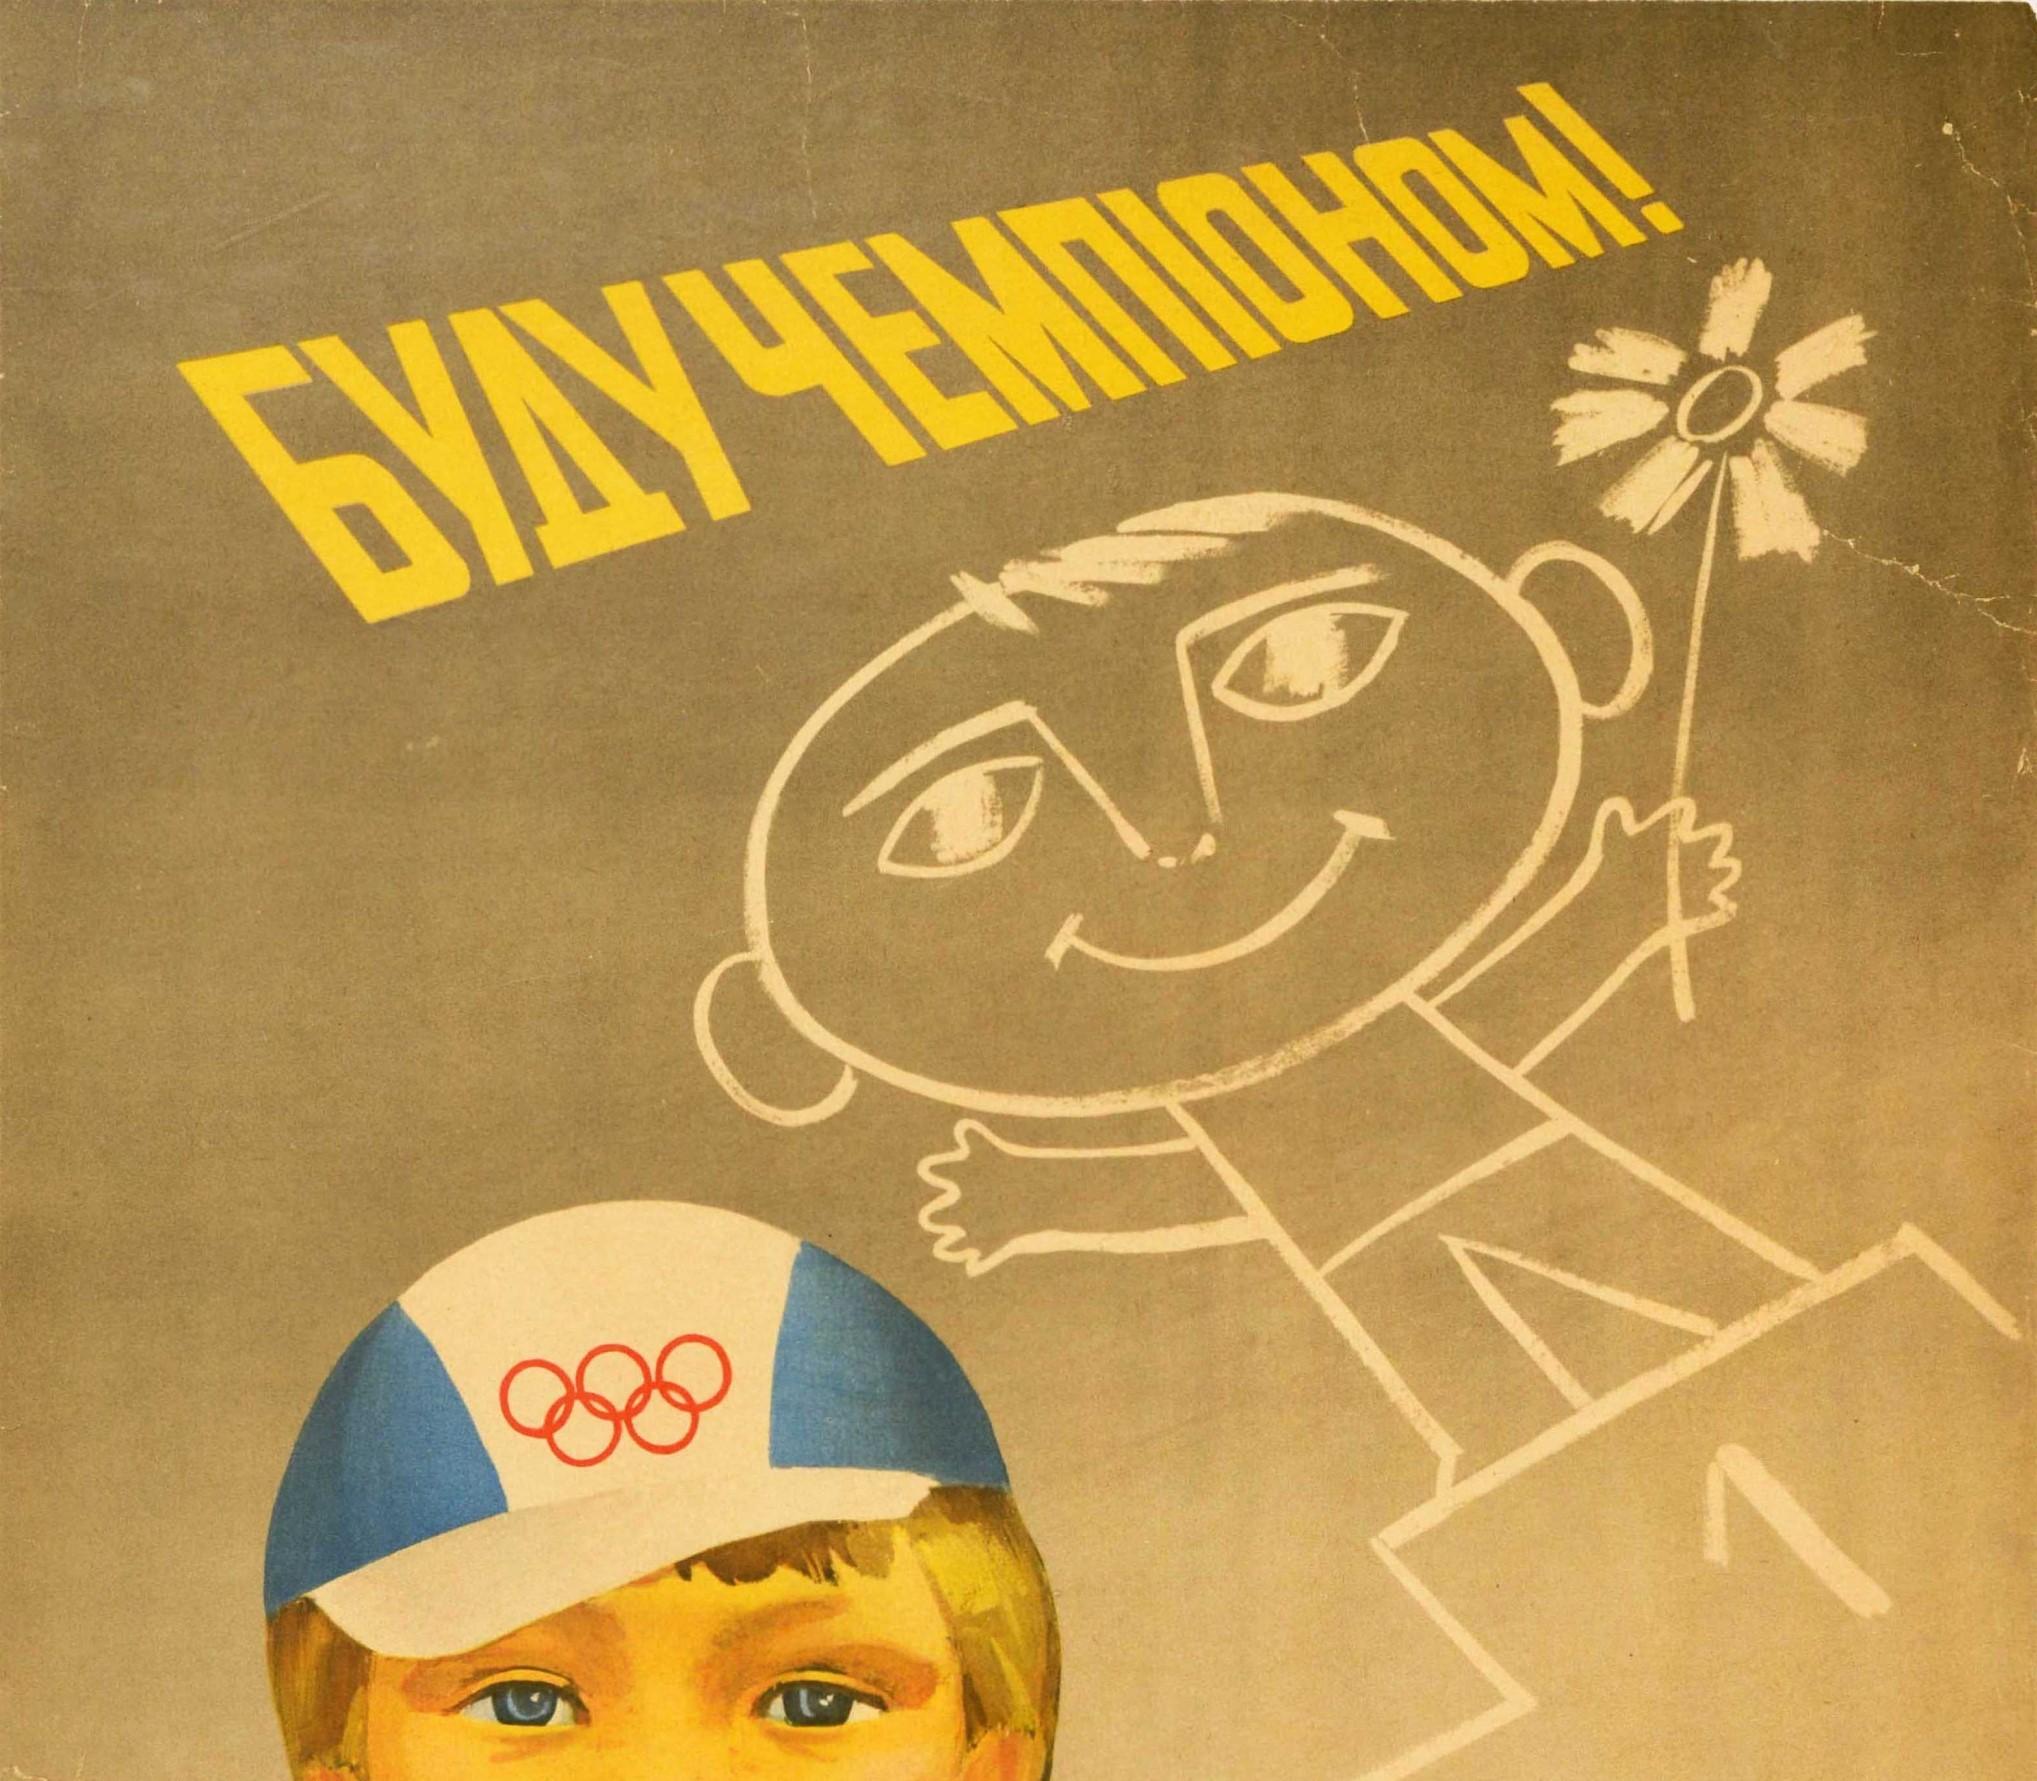 Original vintage sports propaganda poster - I will be a champion! ???? ?????????! - featuring an illustration of a smiling boy with the Olympic rings logo on his cap and the letters ???? on his blue shirt (the abbreviation for Children and Youth